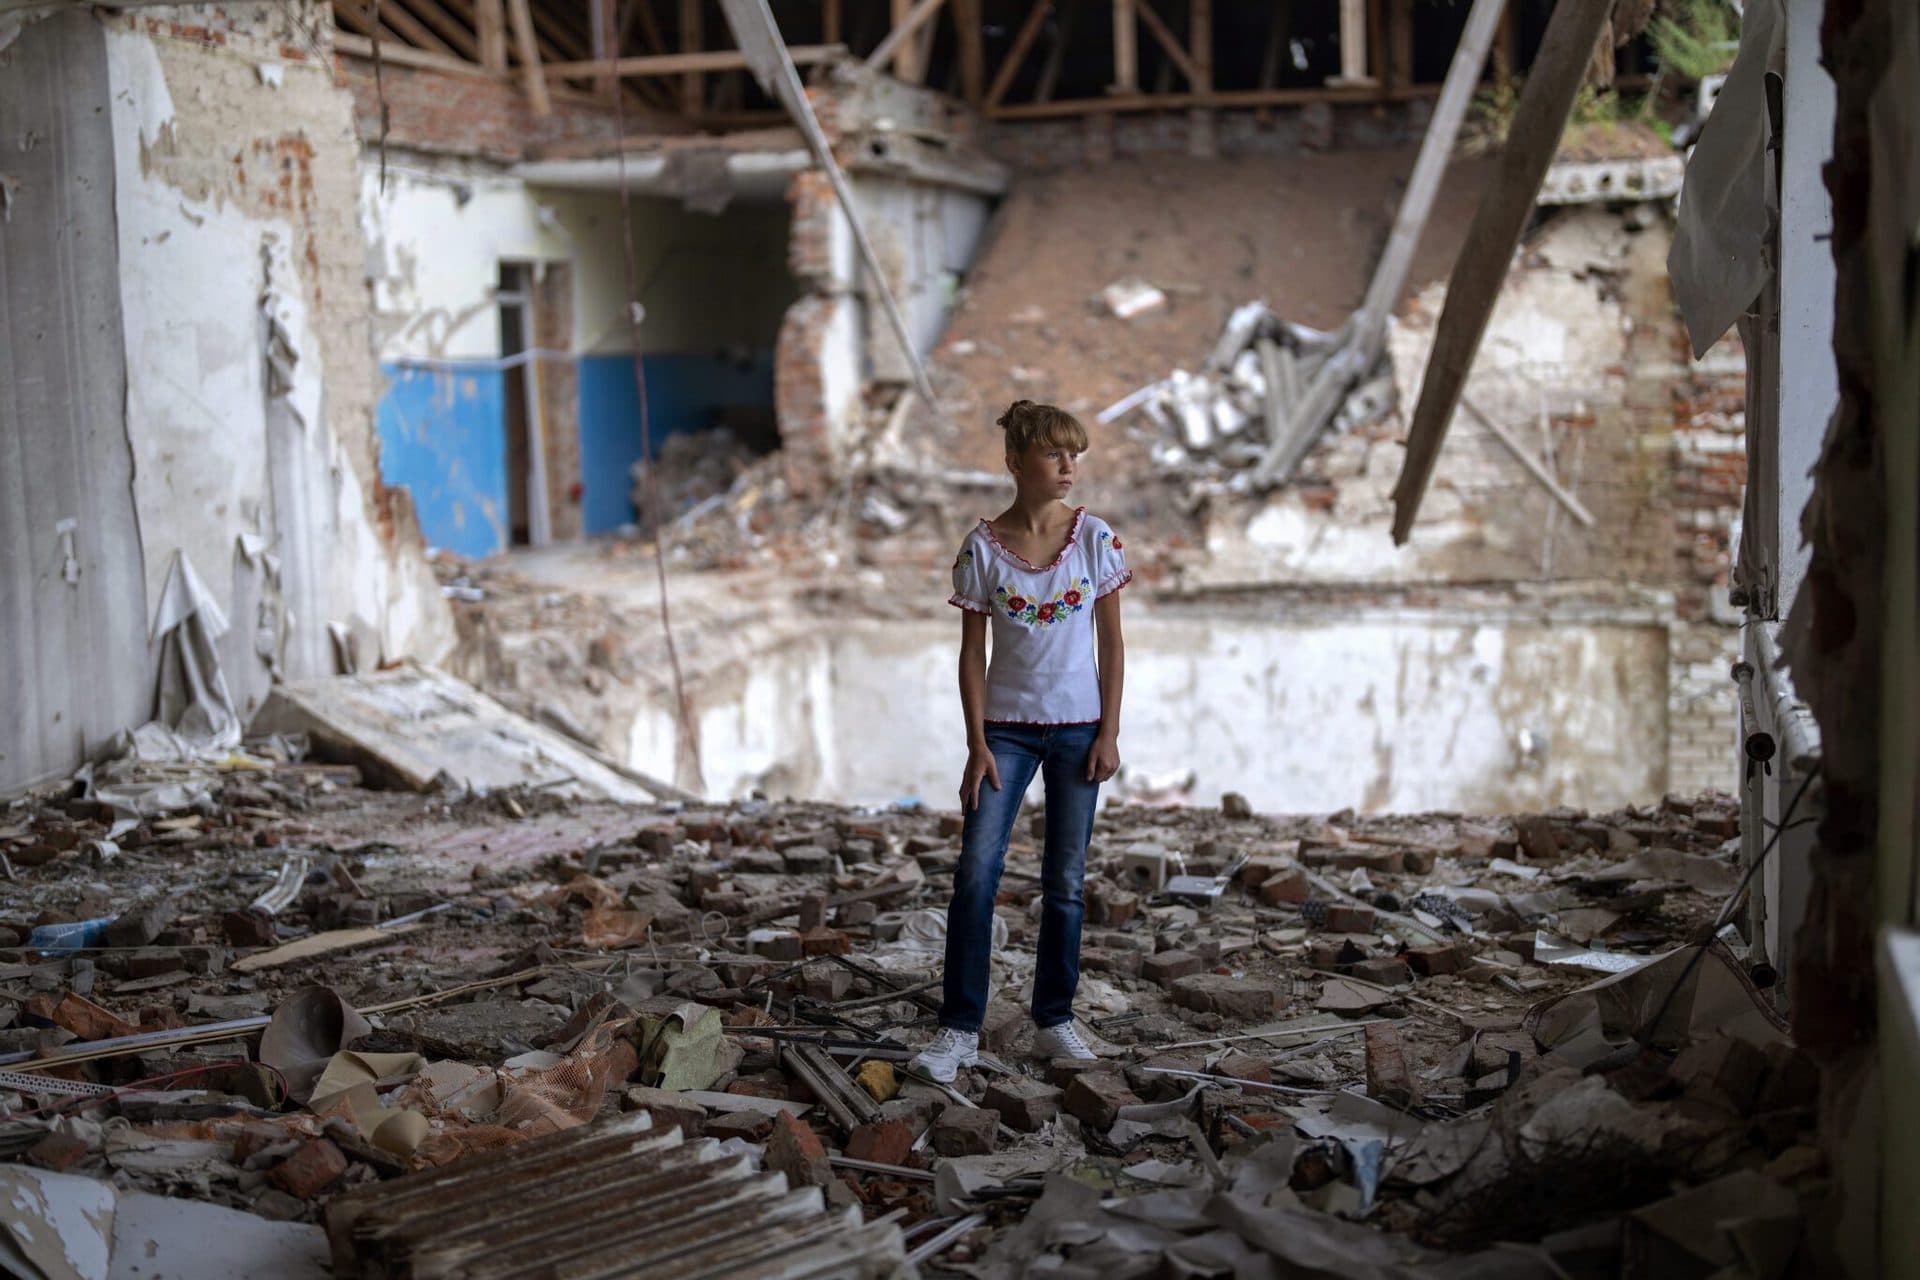 Sofia Klyshnia stands in the rubble of her former classroom, in the same position where her desk sat before the Mykhailo-Kotsyubynske's lyceum was bombed by Russian forces on March 4, in Chernihiv